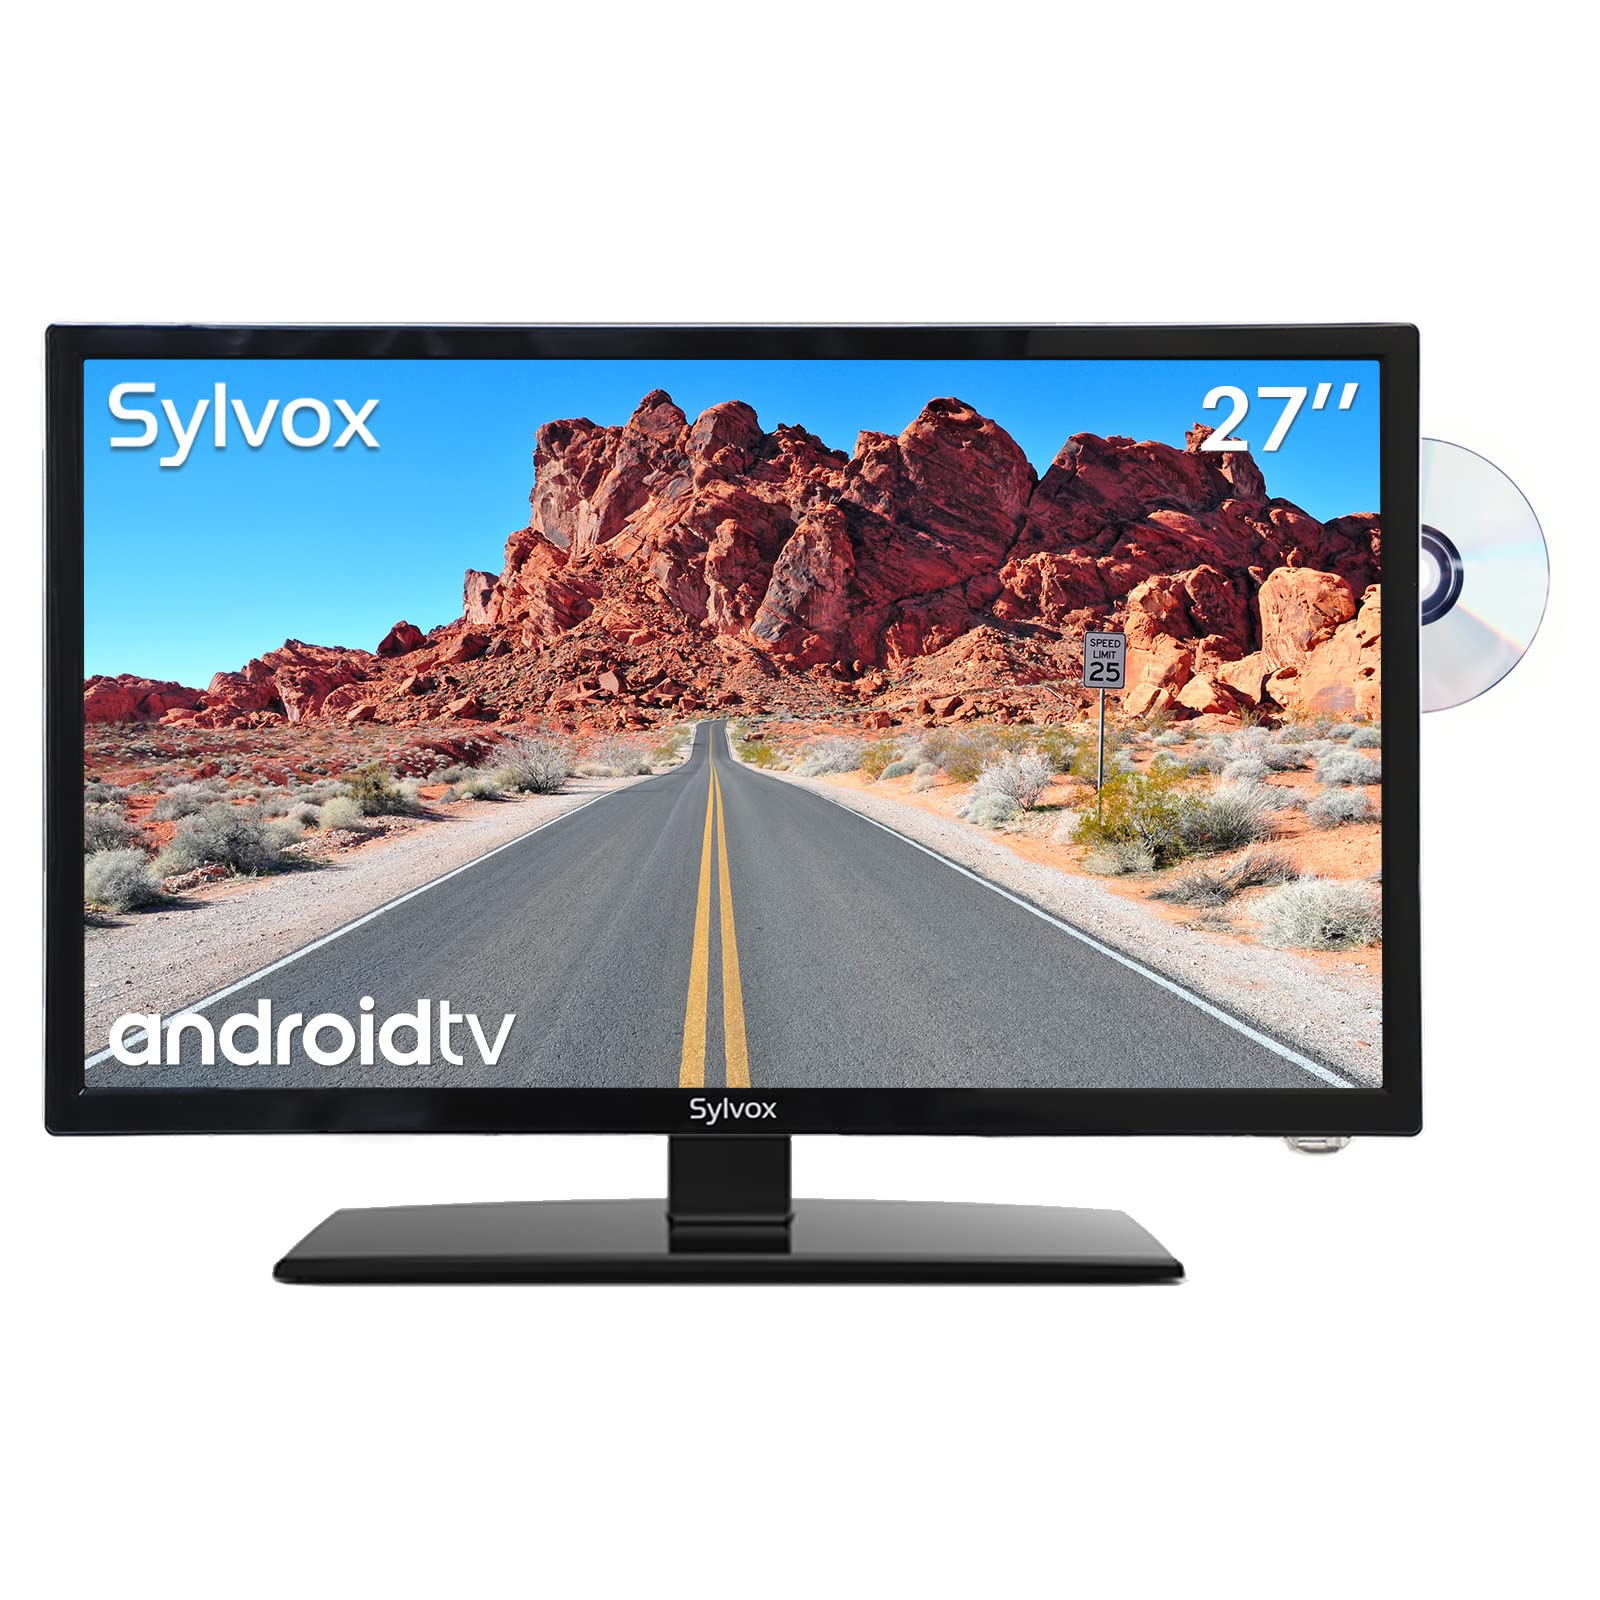 SYLVOX 27 Inch Smart TV 12/24 Volt TV 1080P FHD RV TV Android 11.0 Built-in DVD Player with WiFi Wireless Connection and Digital Noise Reduction Function,Black